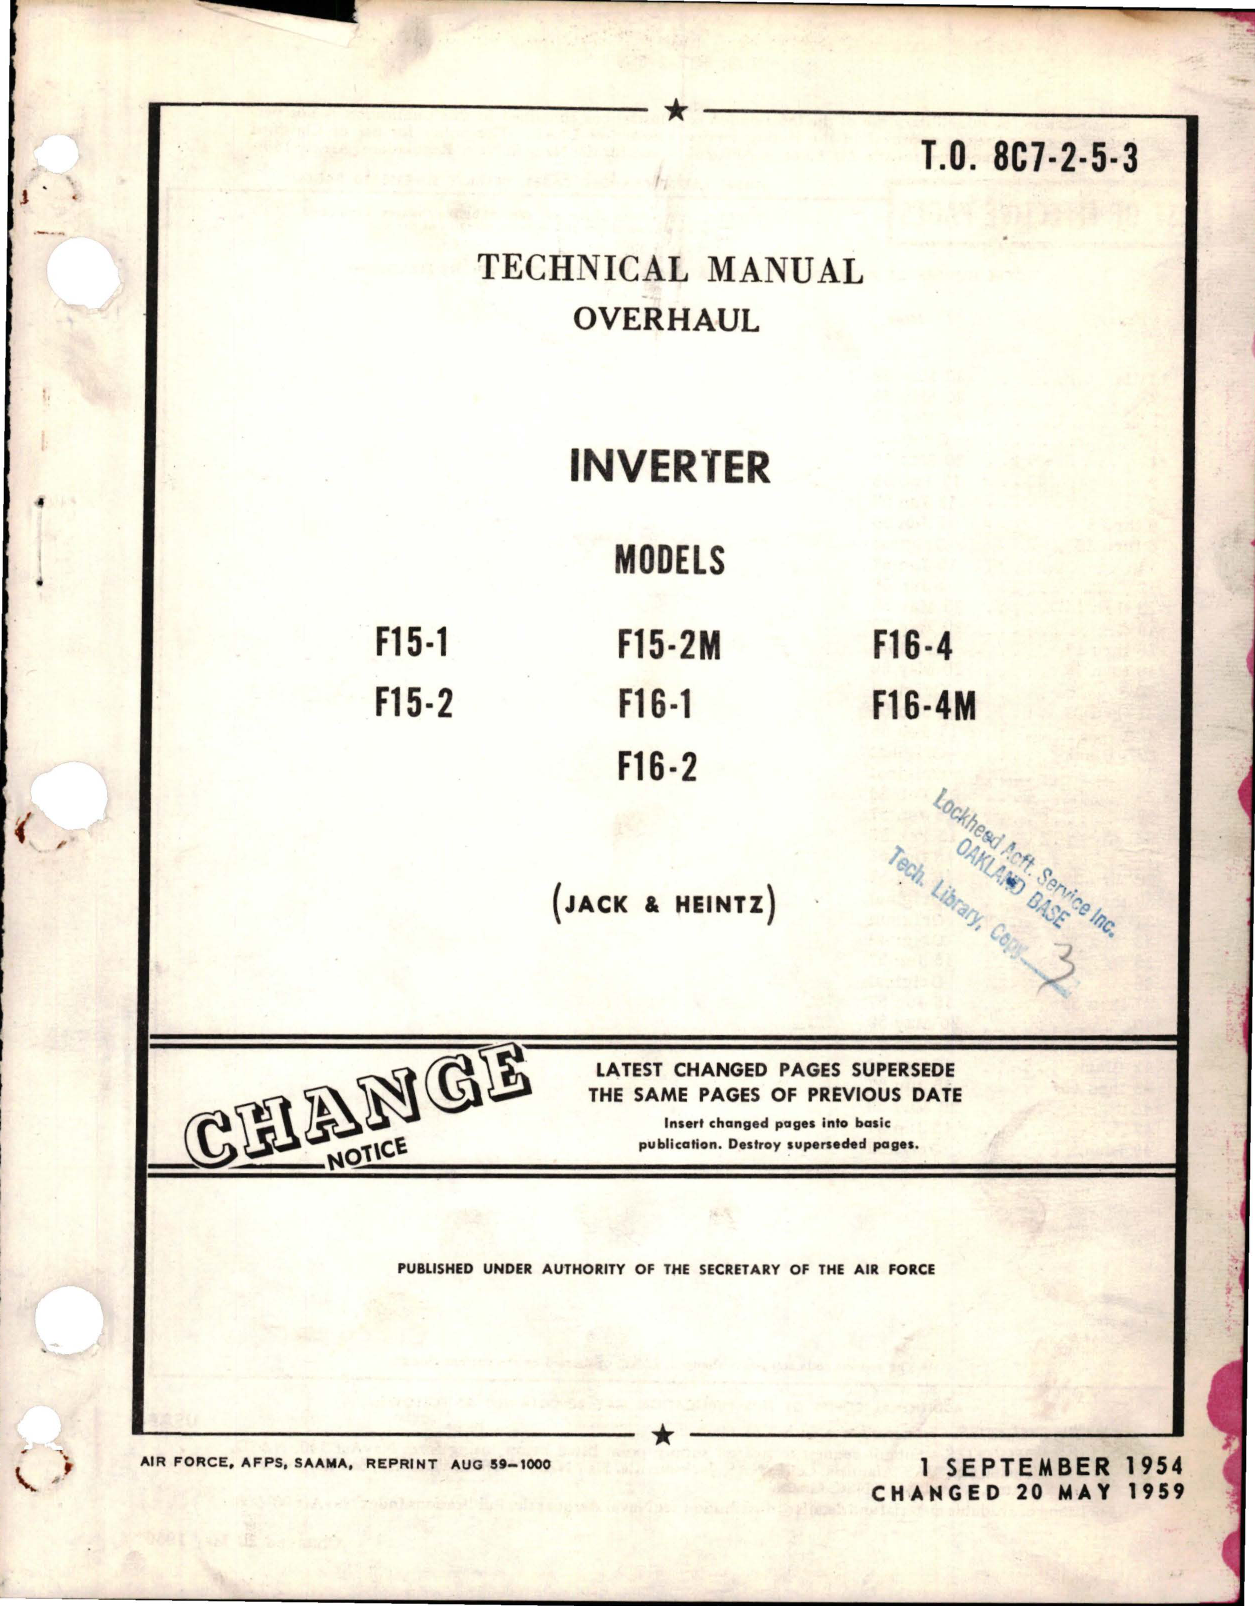 Sample page 1 from AirCorps Library document: Overhaul Manual for Inverter - Models F15-1, F15-2, F15-2M, F16-1, F16-2, F16-4, and F16-4M